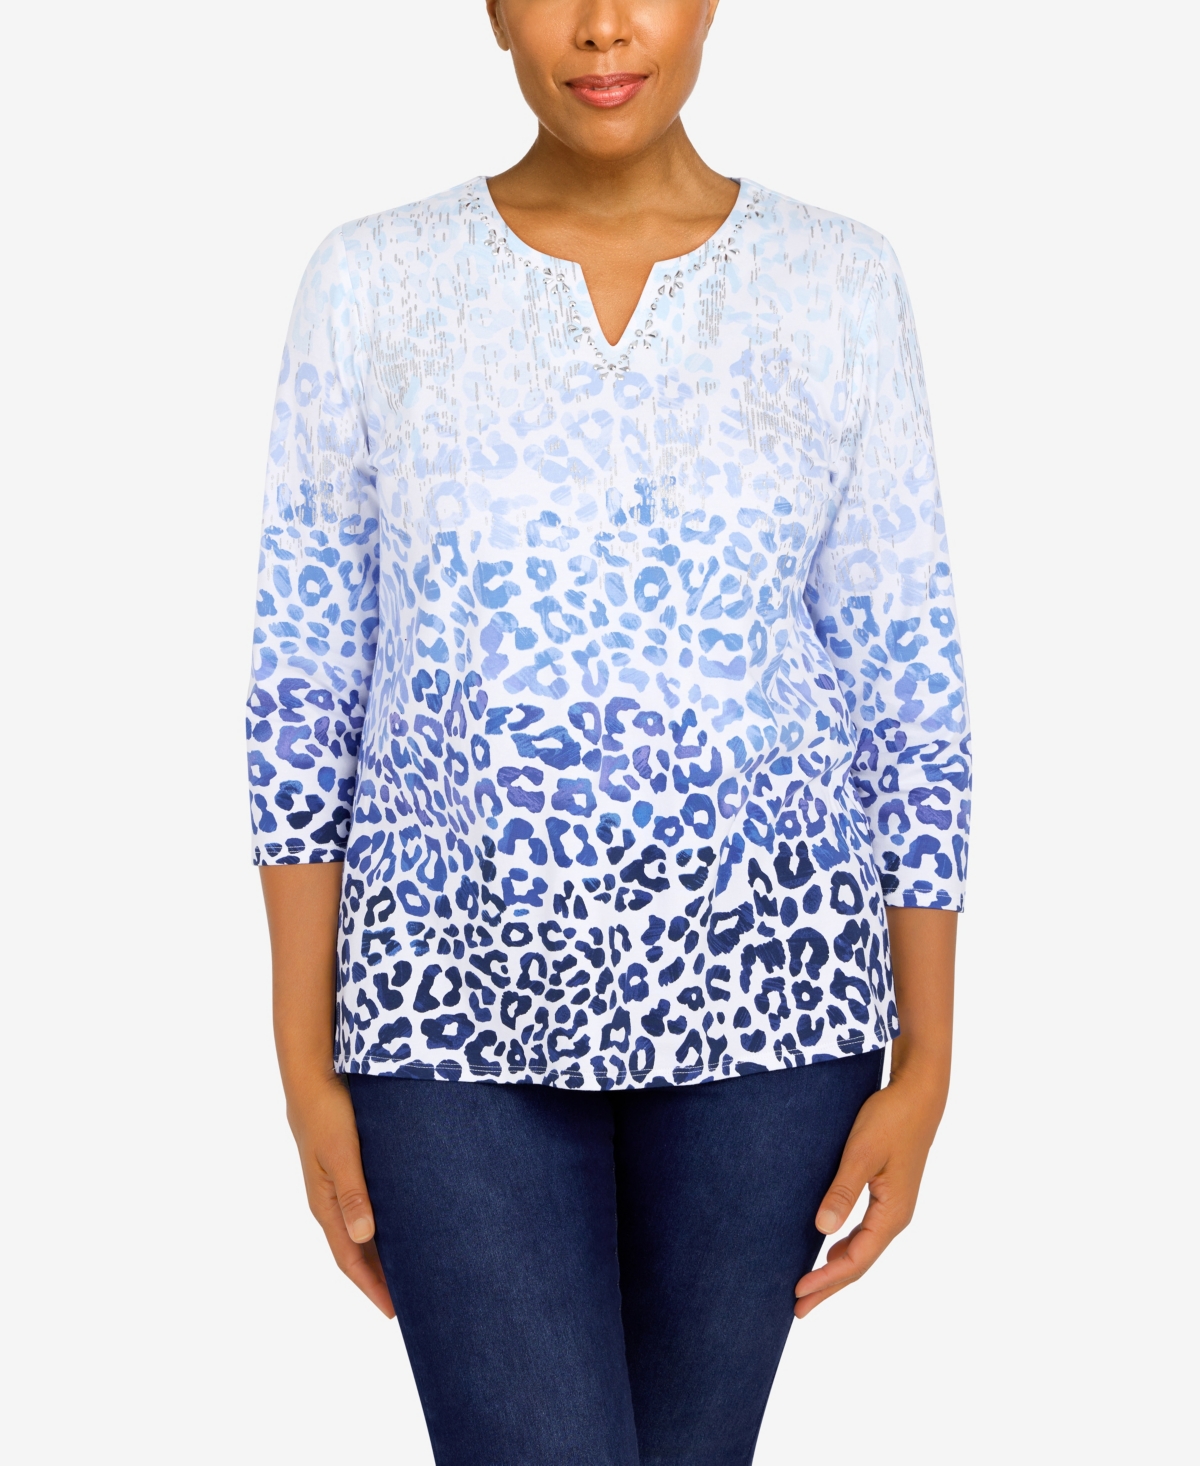 ALFRED DUNNER PETITE CLASSICS SPLIT NECK ANIMAL OMBRE TOP